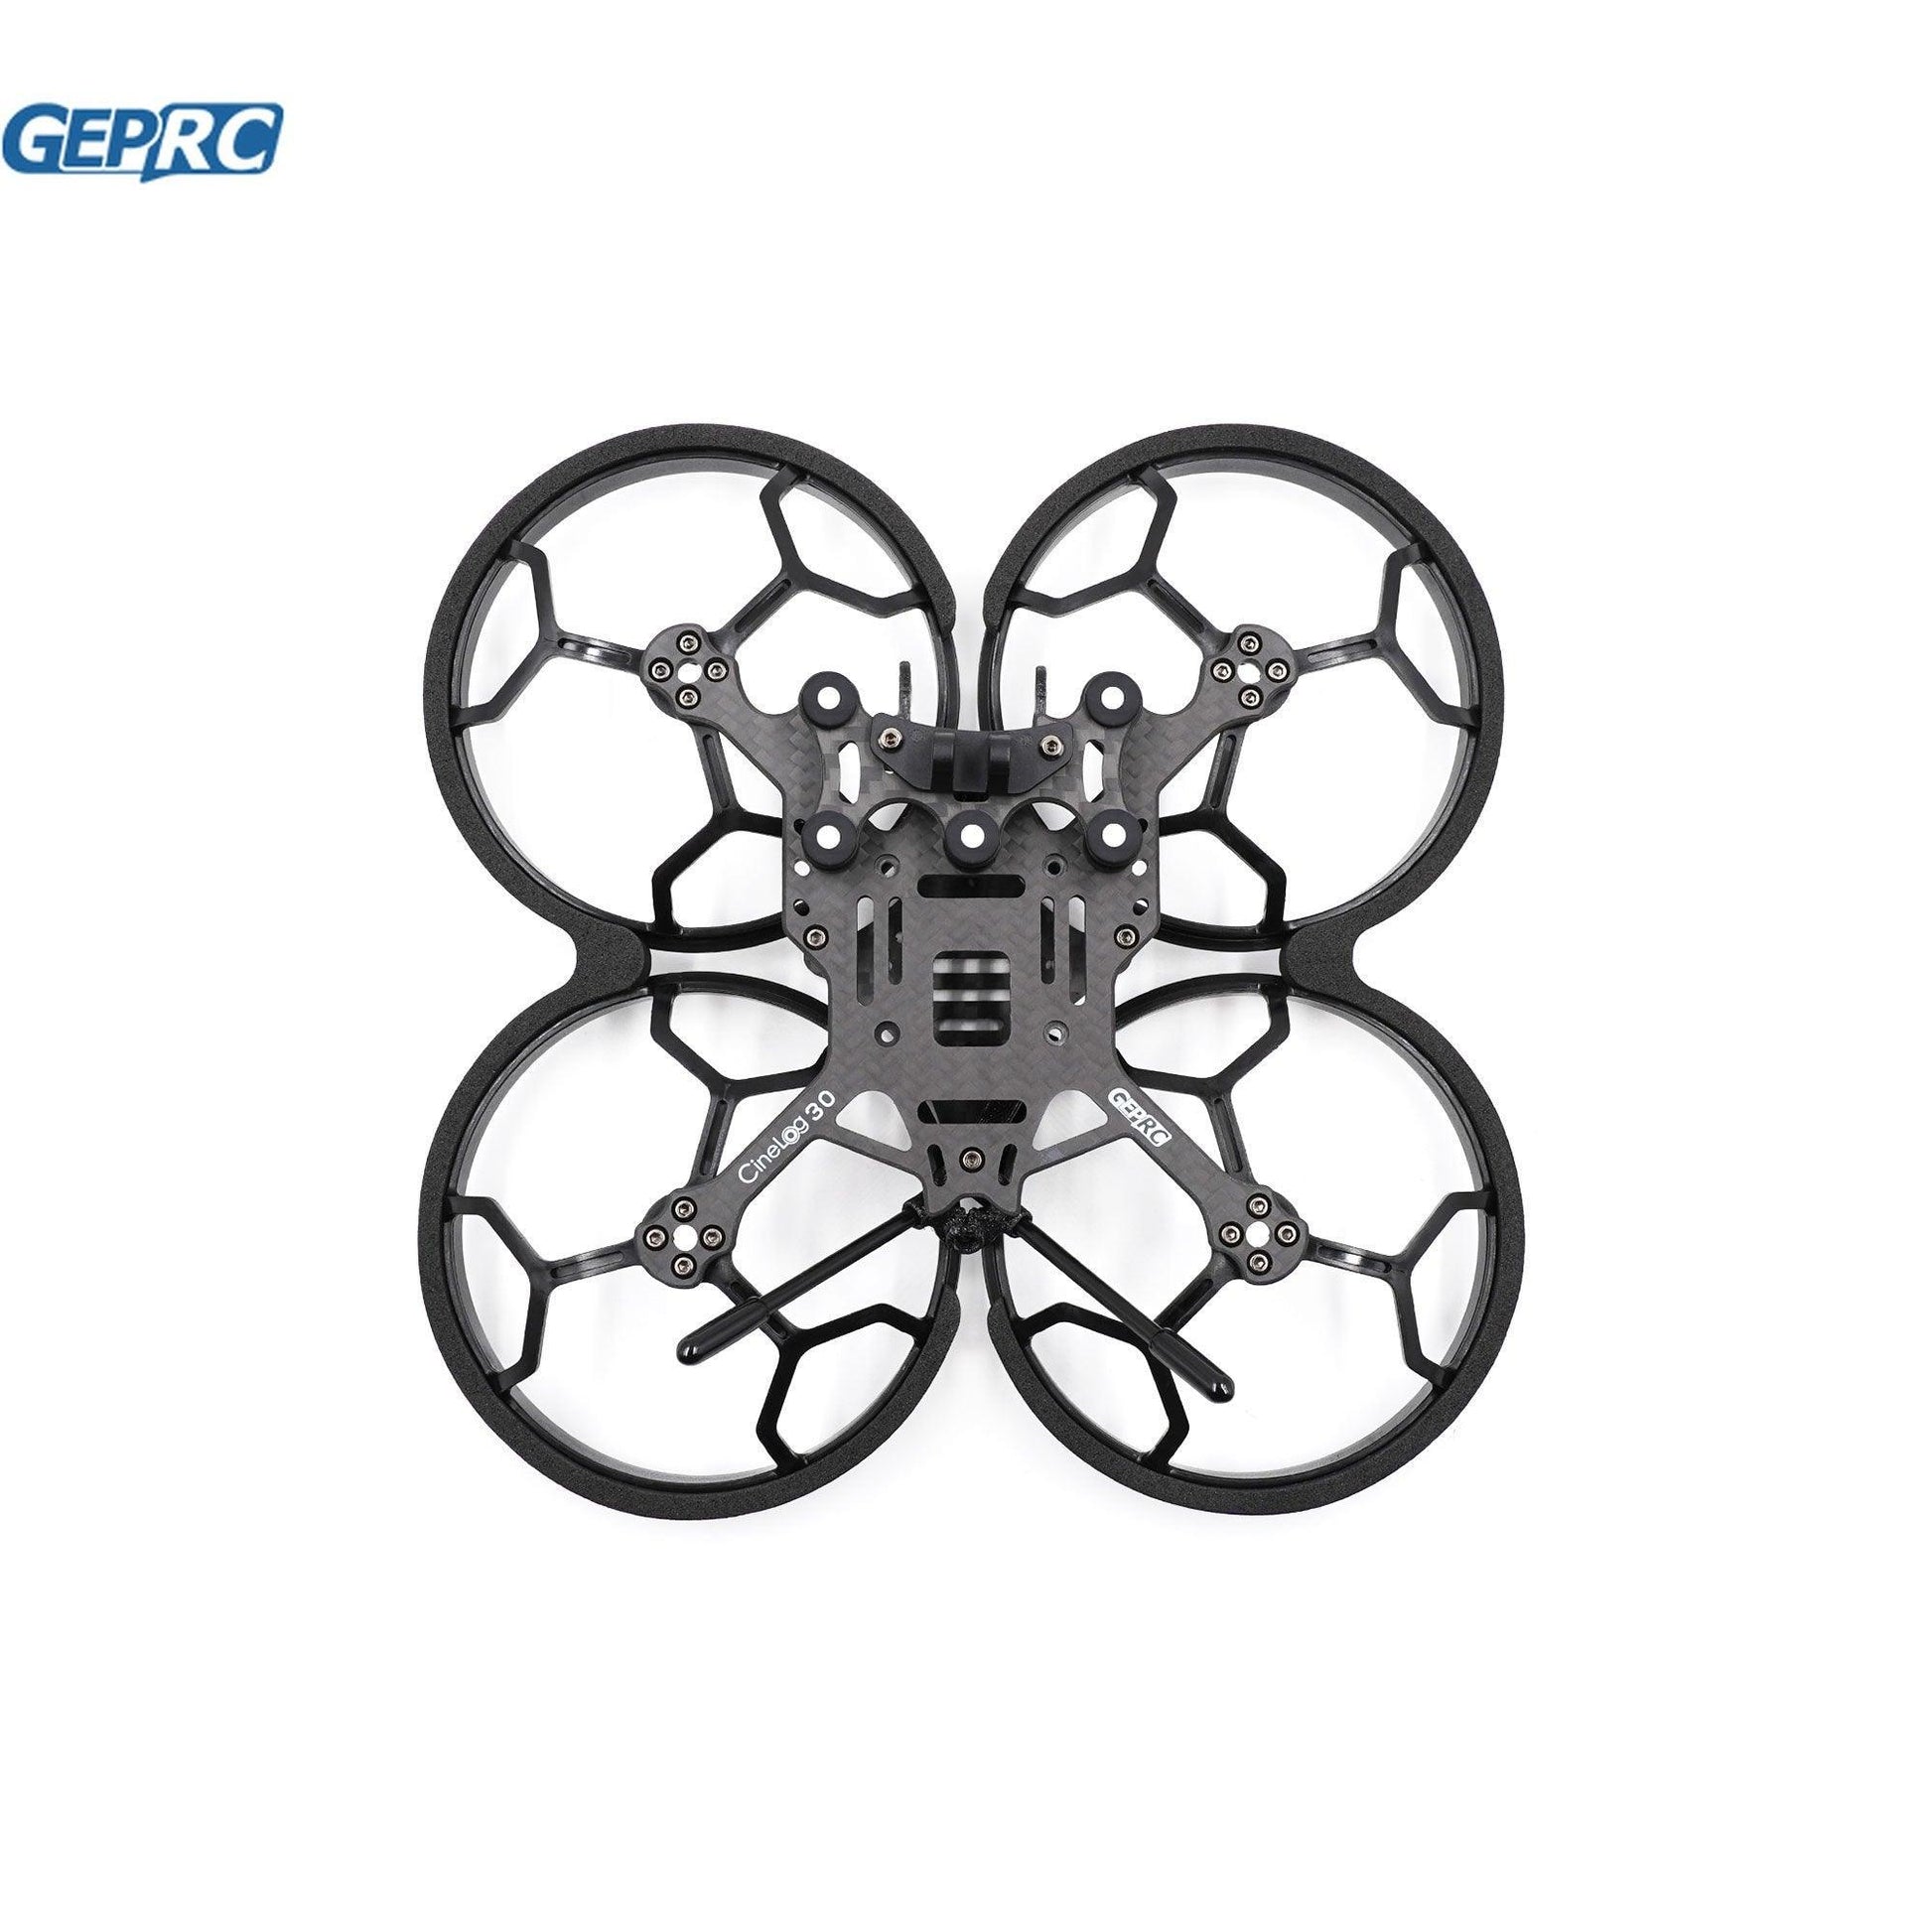 GEPRC GEP-CL30 Frame Kit Suitable For Cinelog30 Drone Carbon Fiber Frame For DIY RC FPV Quadcopter Drone Accessories Parts - RCDrone